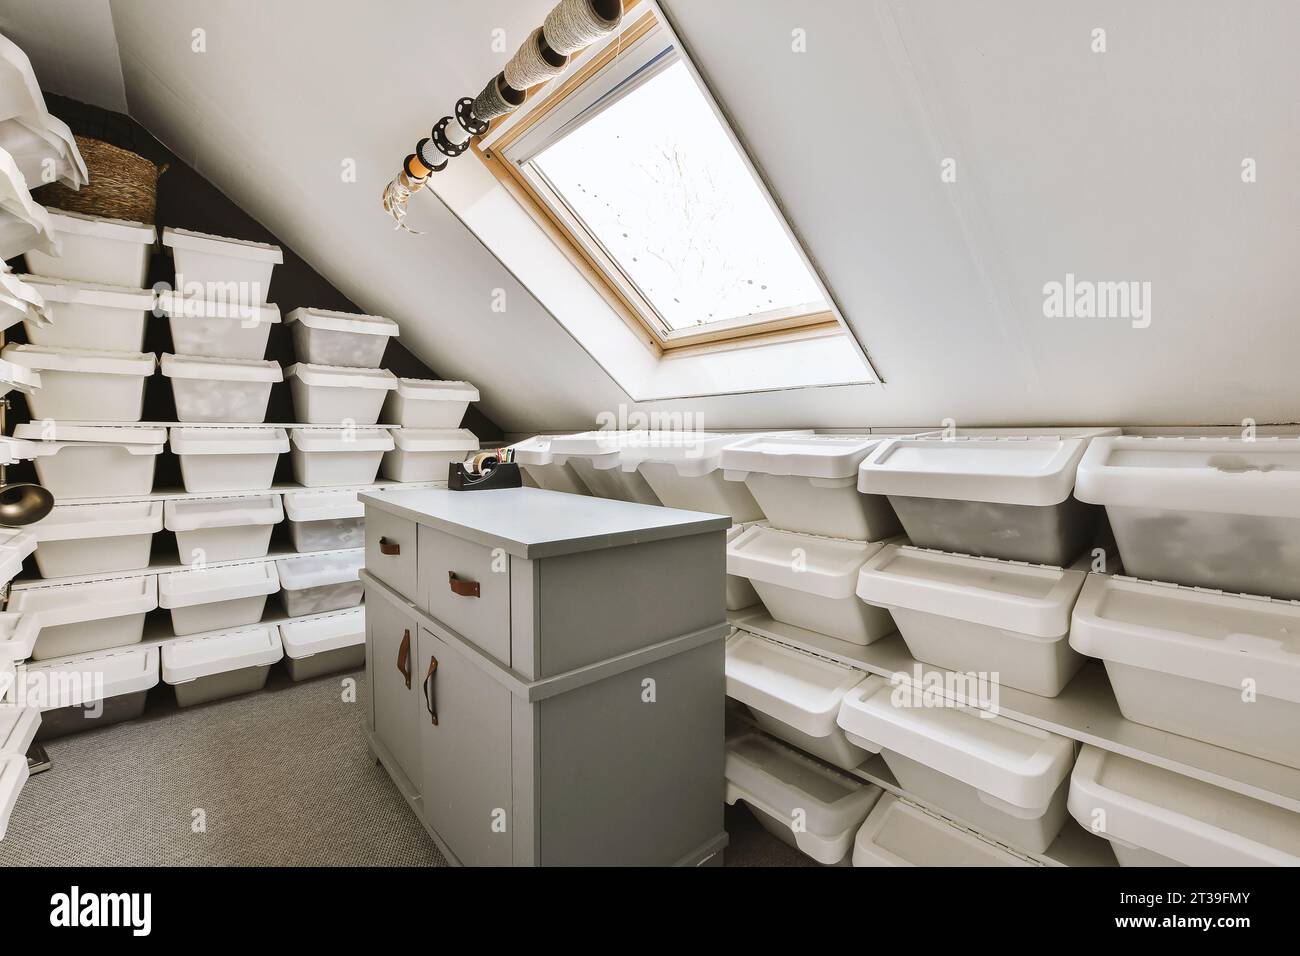 https://c8.alamy.com/comp/2T39FMY/wooden-cabinet-and-white-plastic-boxes-stacked-and-arranged-by-bright-window-in-attic-room-at-home-2T39FMY.jpg